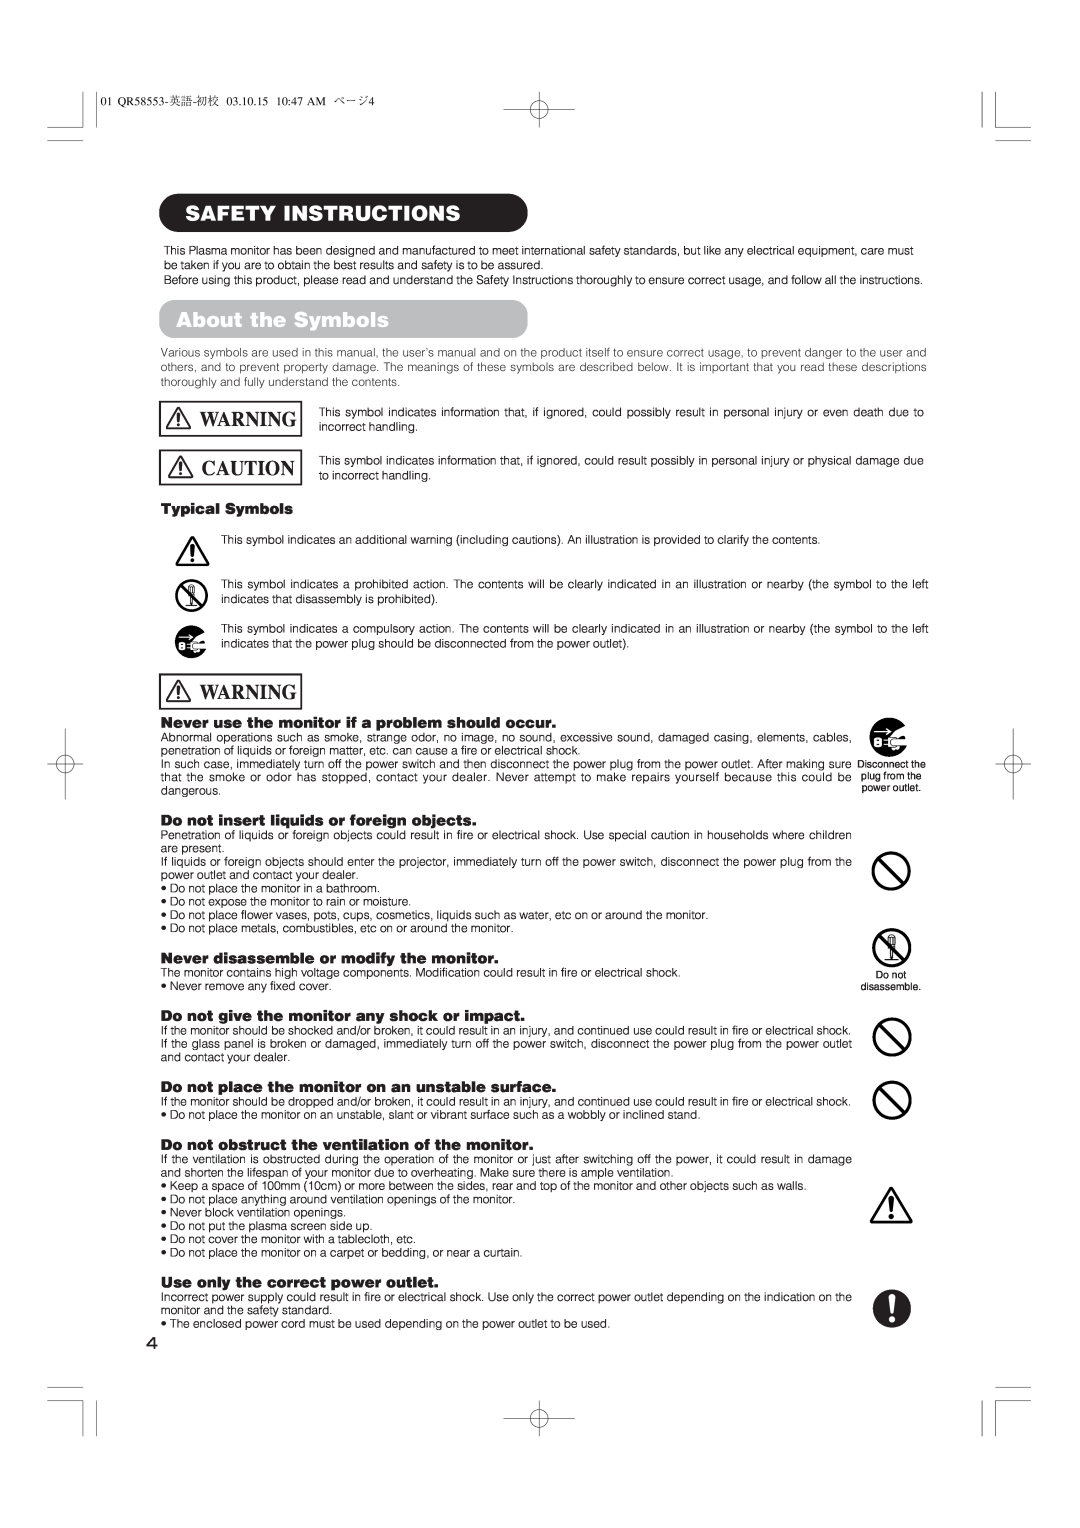 Hitachi 42PD5000 Safety Instructions, About the Symbols, Typical Symbols, Never use the monitor if a problem should occur 